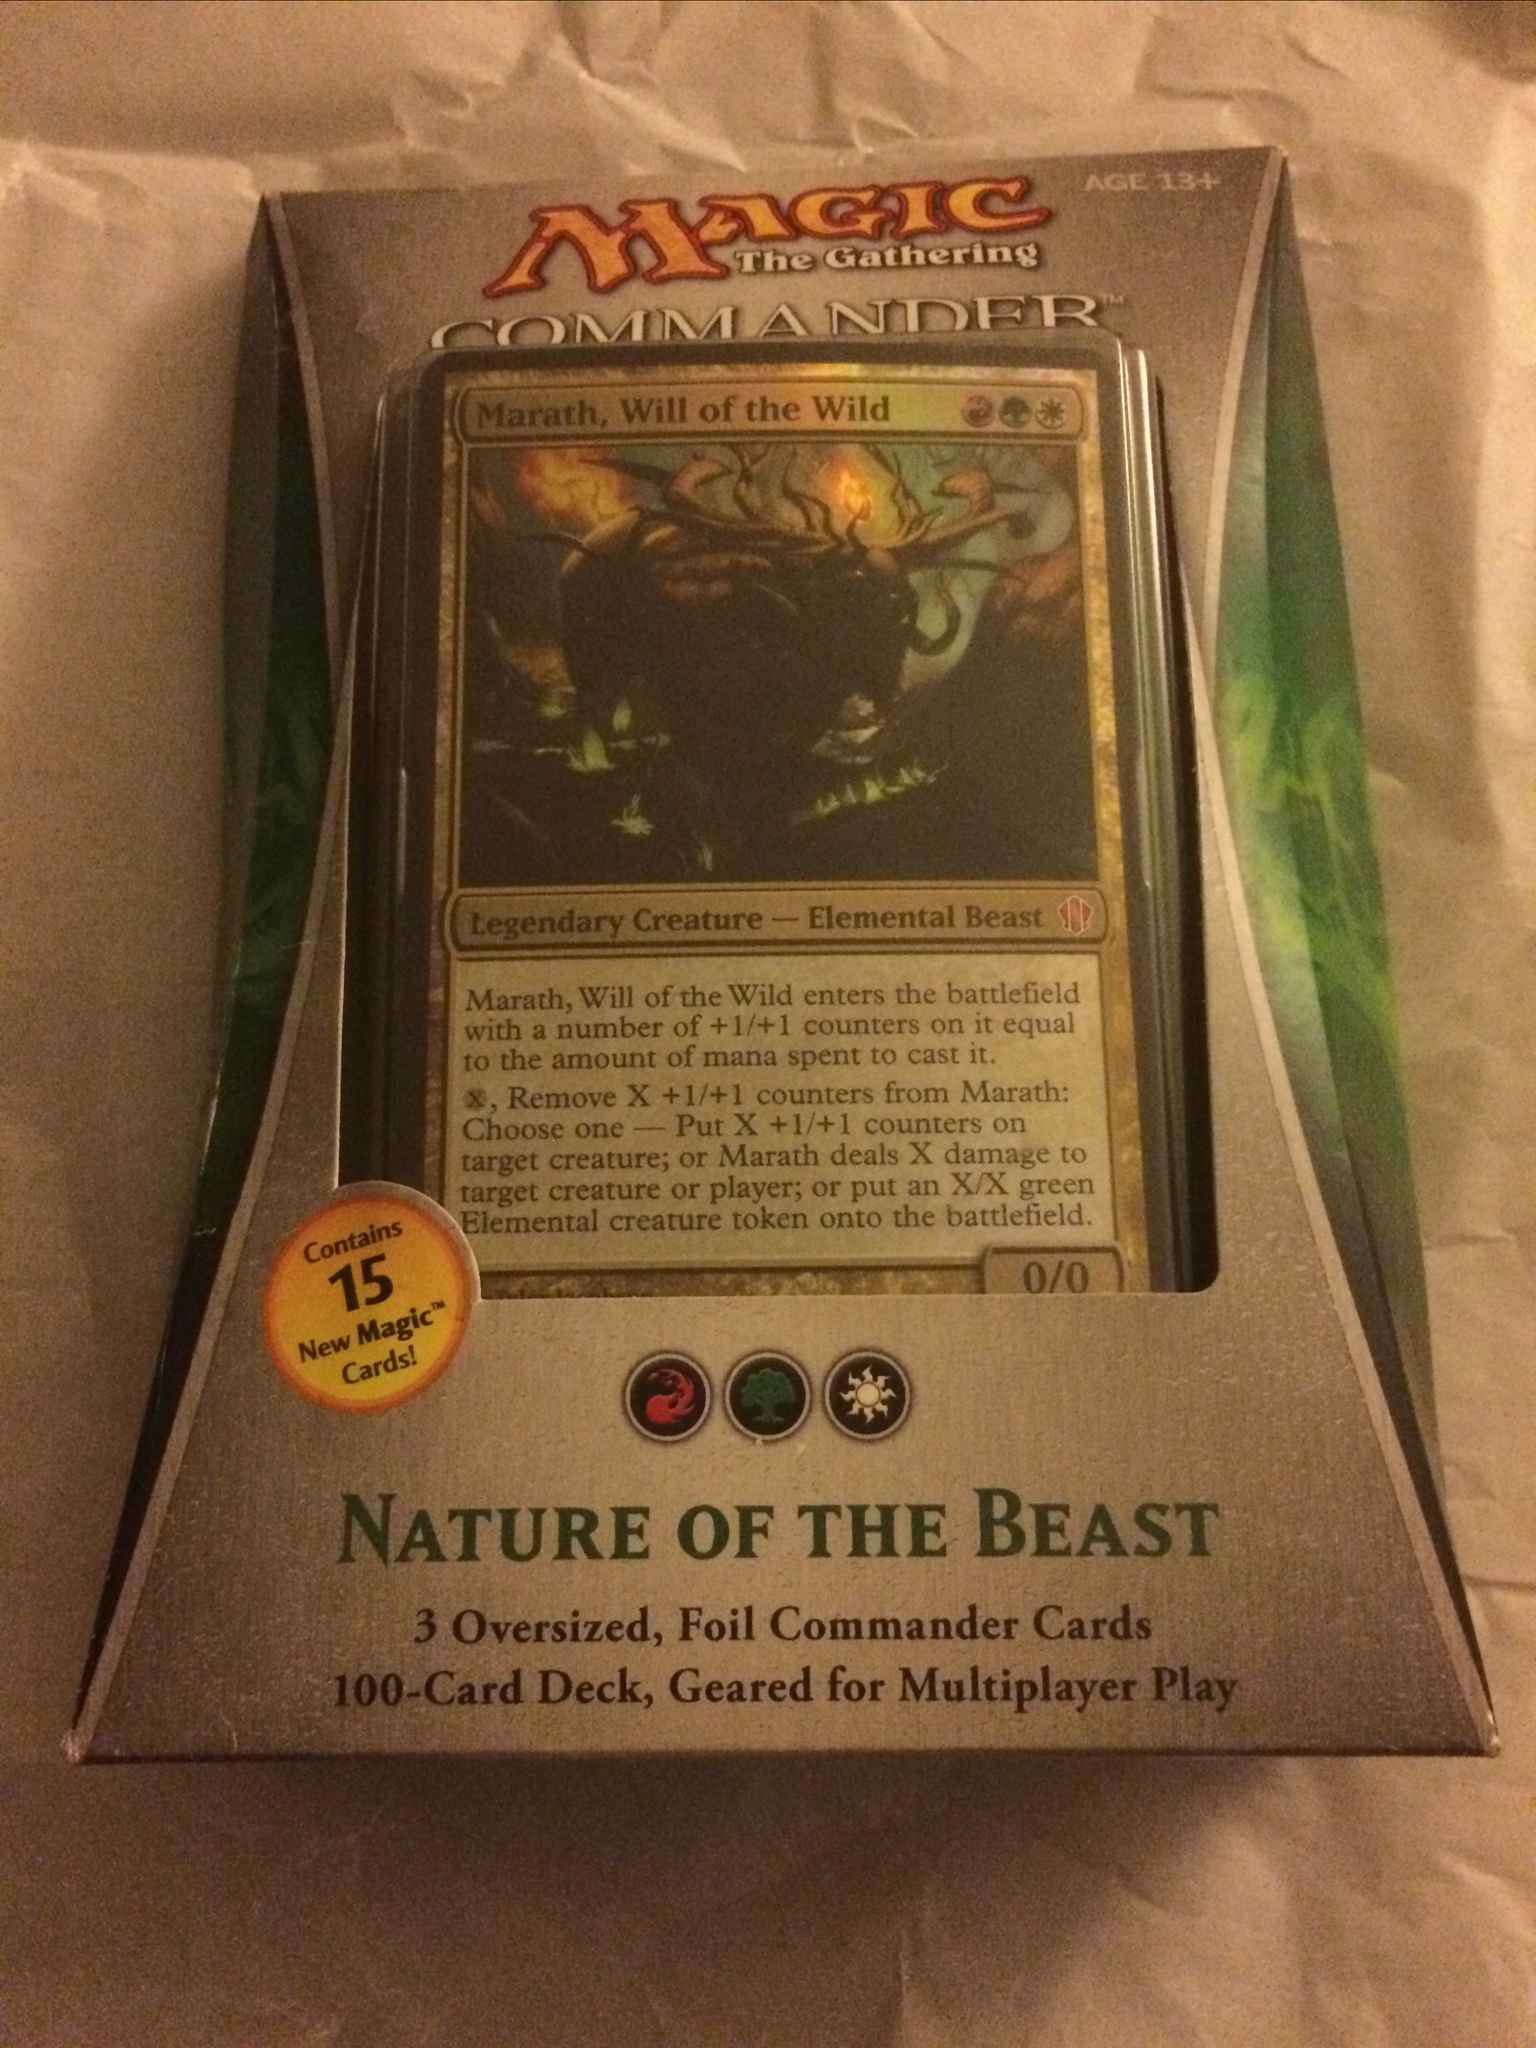 2013 Commander - Nature of the Beast 2013 - Nature of Beast Deck - Commander 2013 - Magic: the Gathering